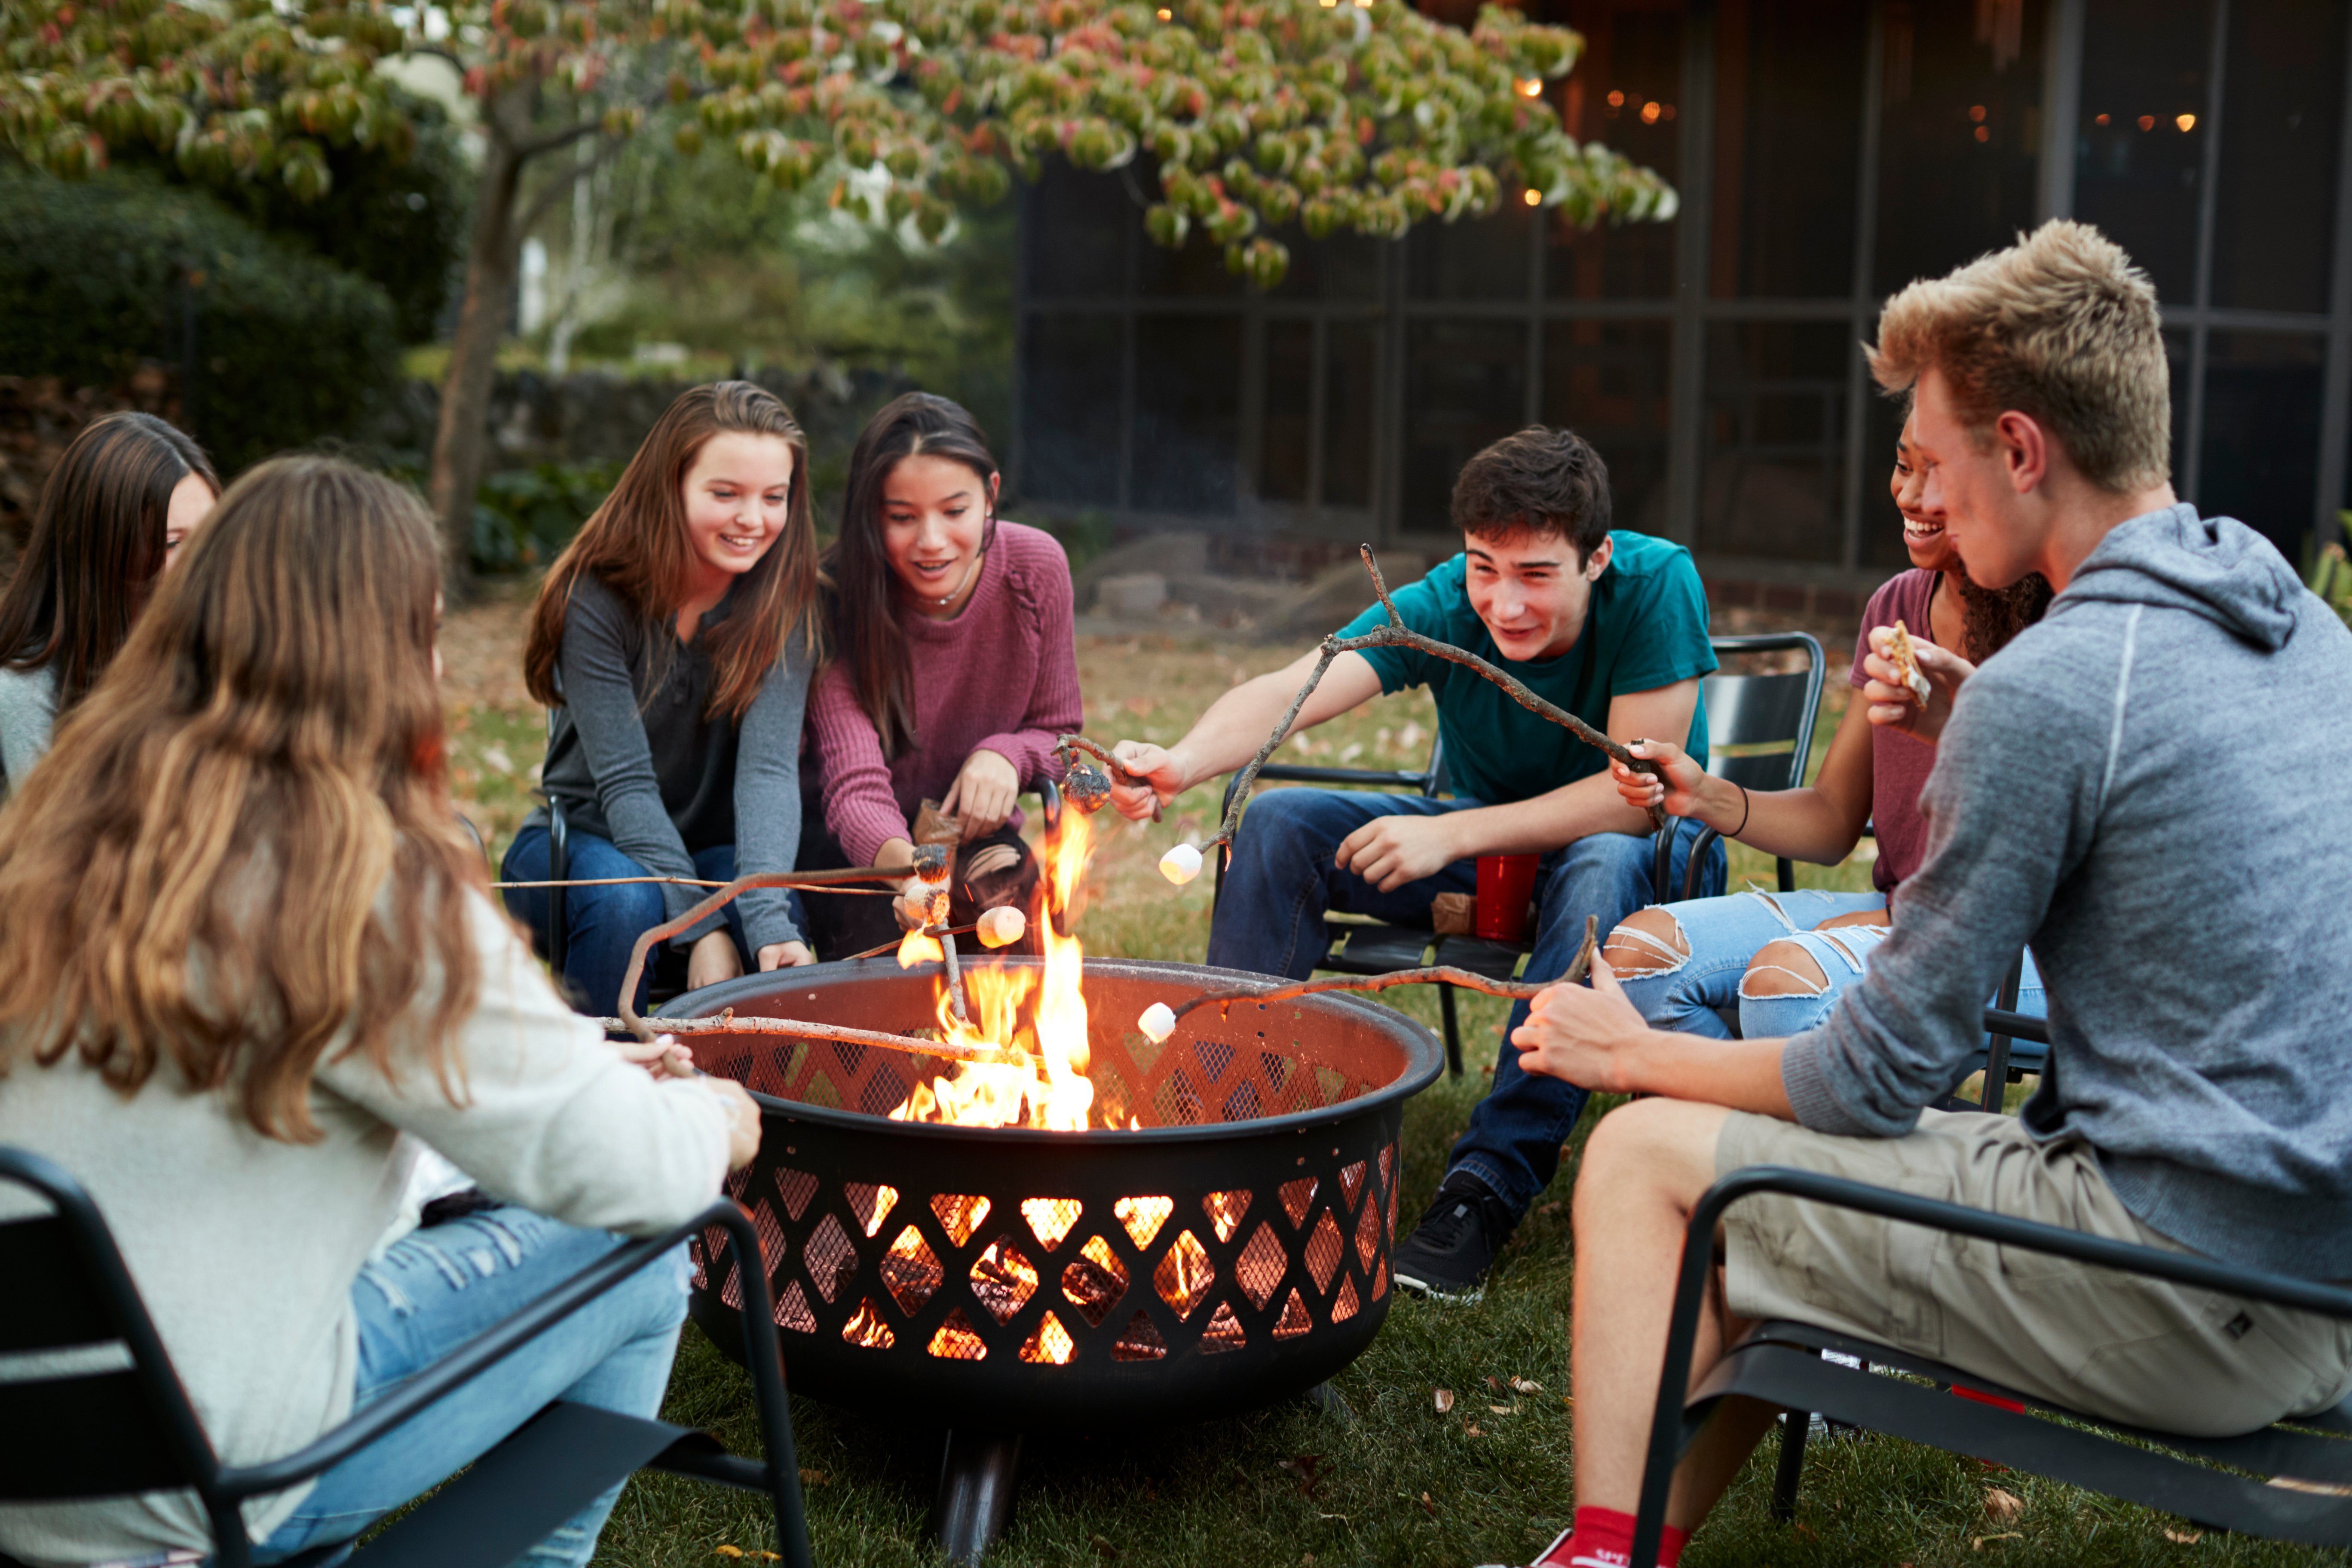 Teenagers roasting marshmallows around a fire